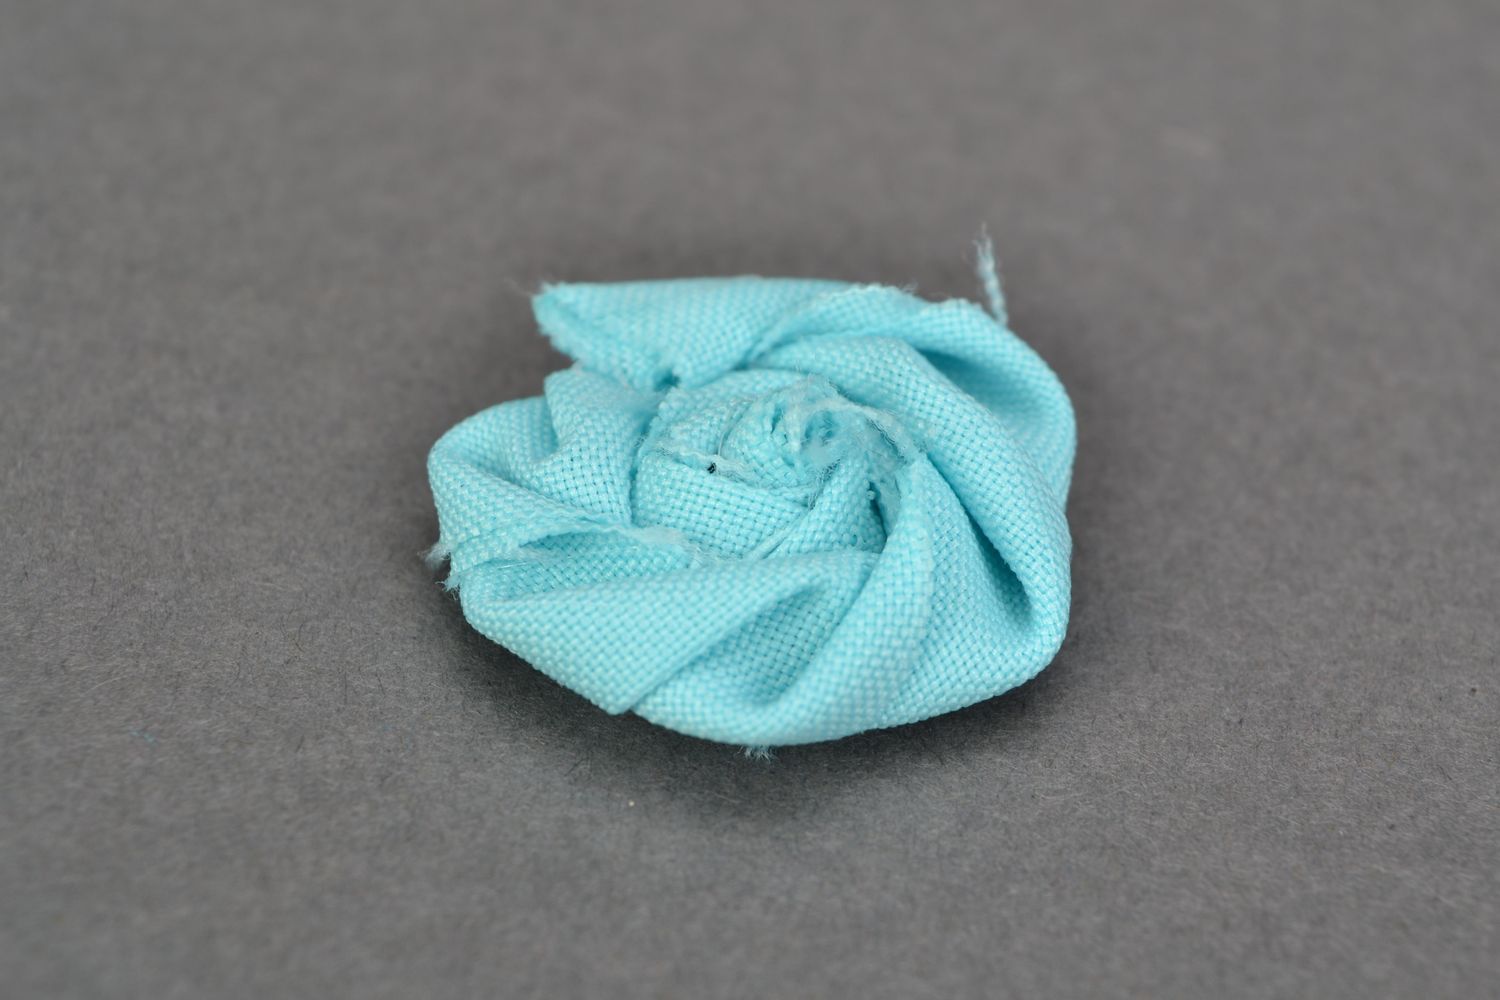 Set of 6 small light blue handmade fabric rose flowers for jewelry making photo 4